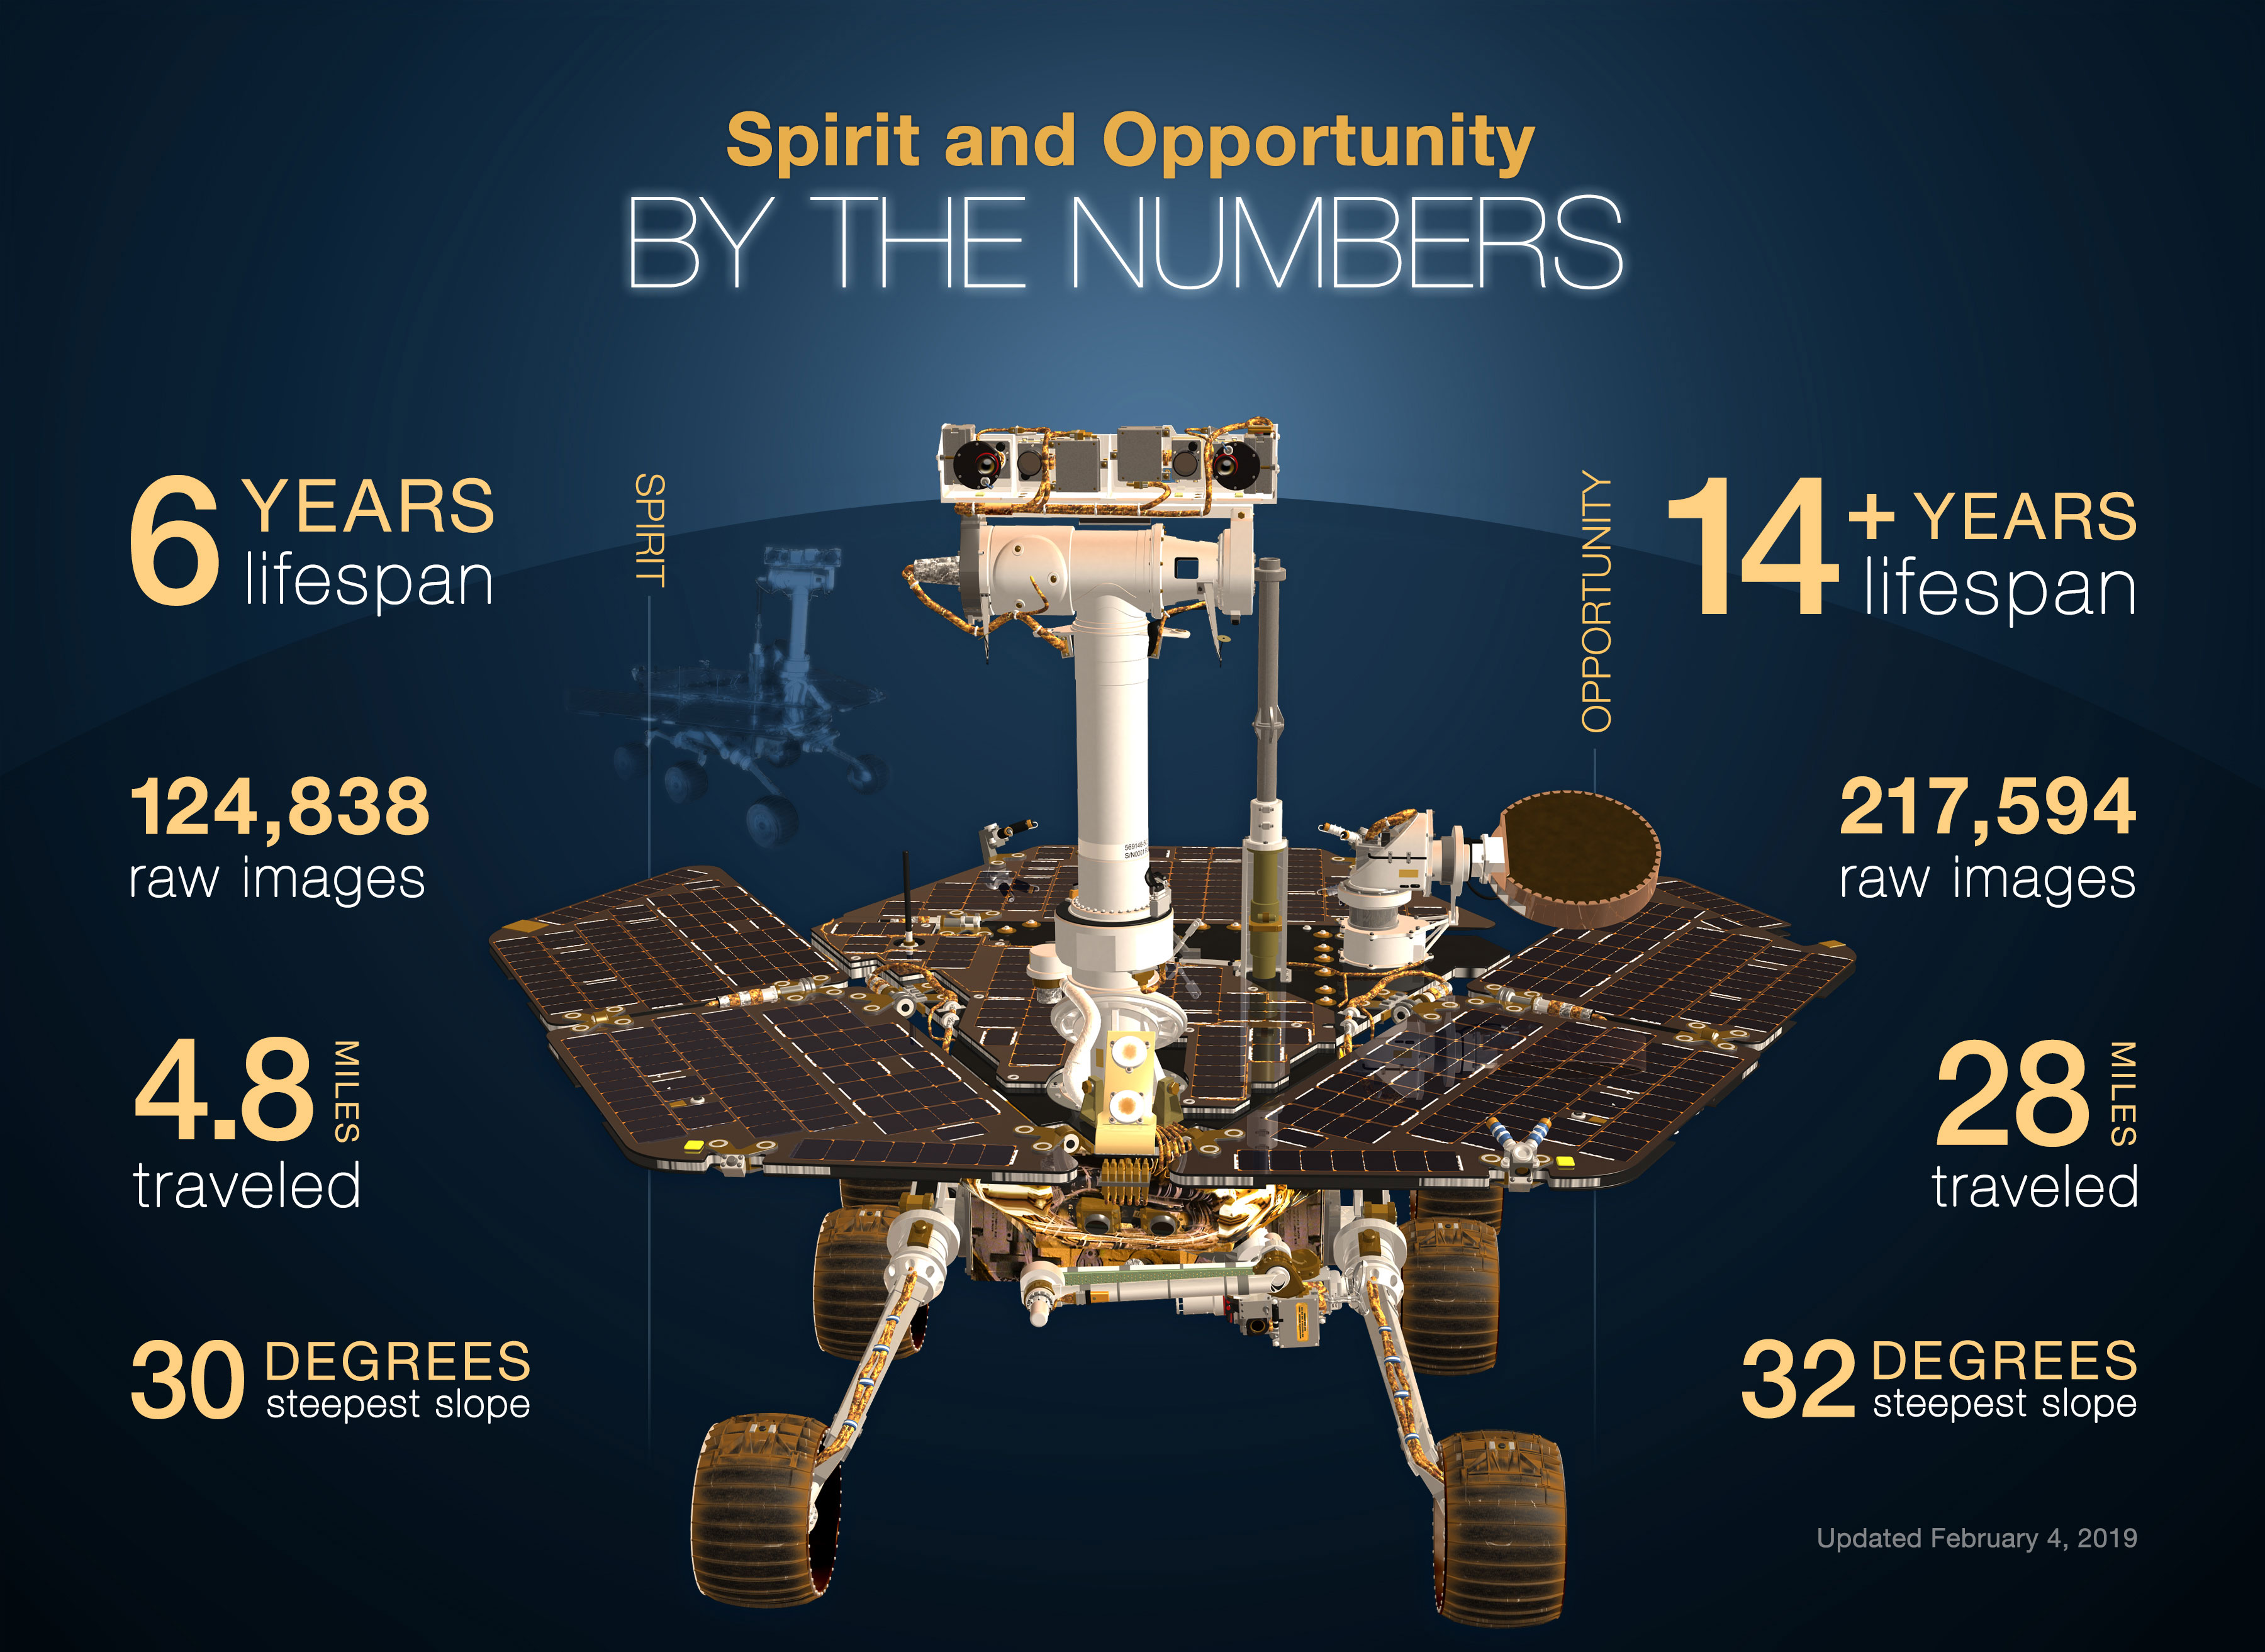 This inforgraphic shows a Mars rover and highlights from their tenure on Mars - including 14 years lifespan, more than 300,000 raw images and as much as 28 miles traveled.